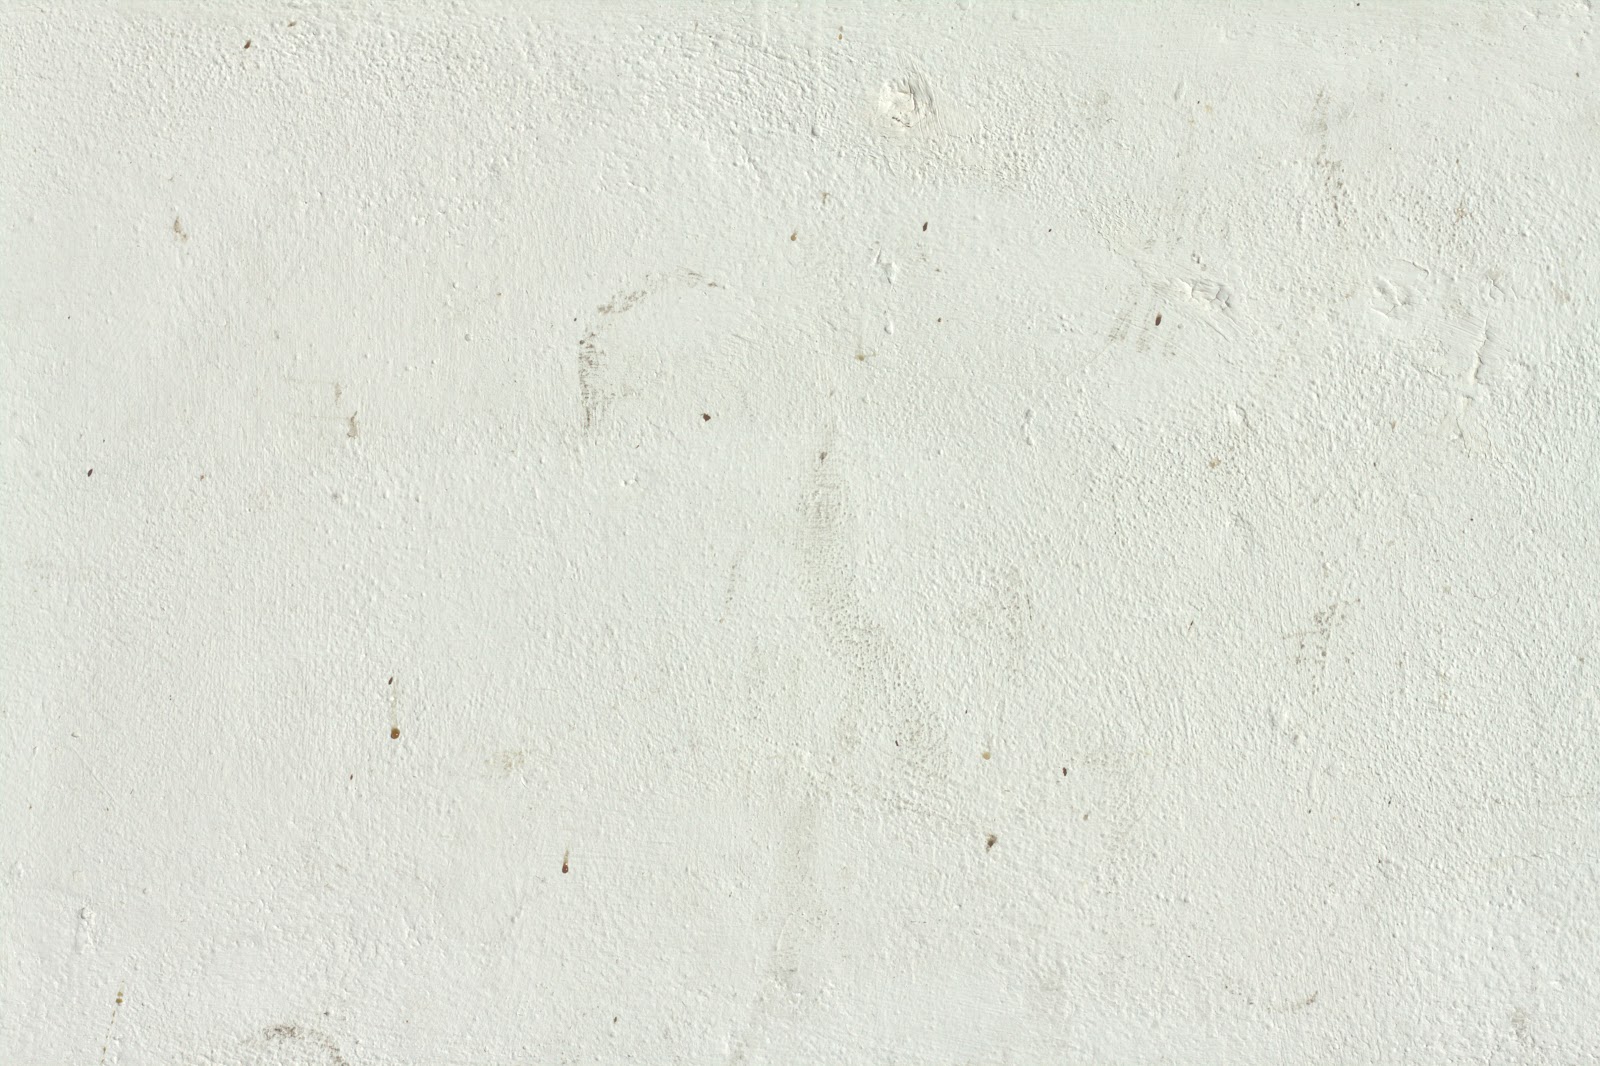 Stucco white dirty wall plaster texture 4770x3178